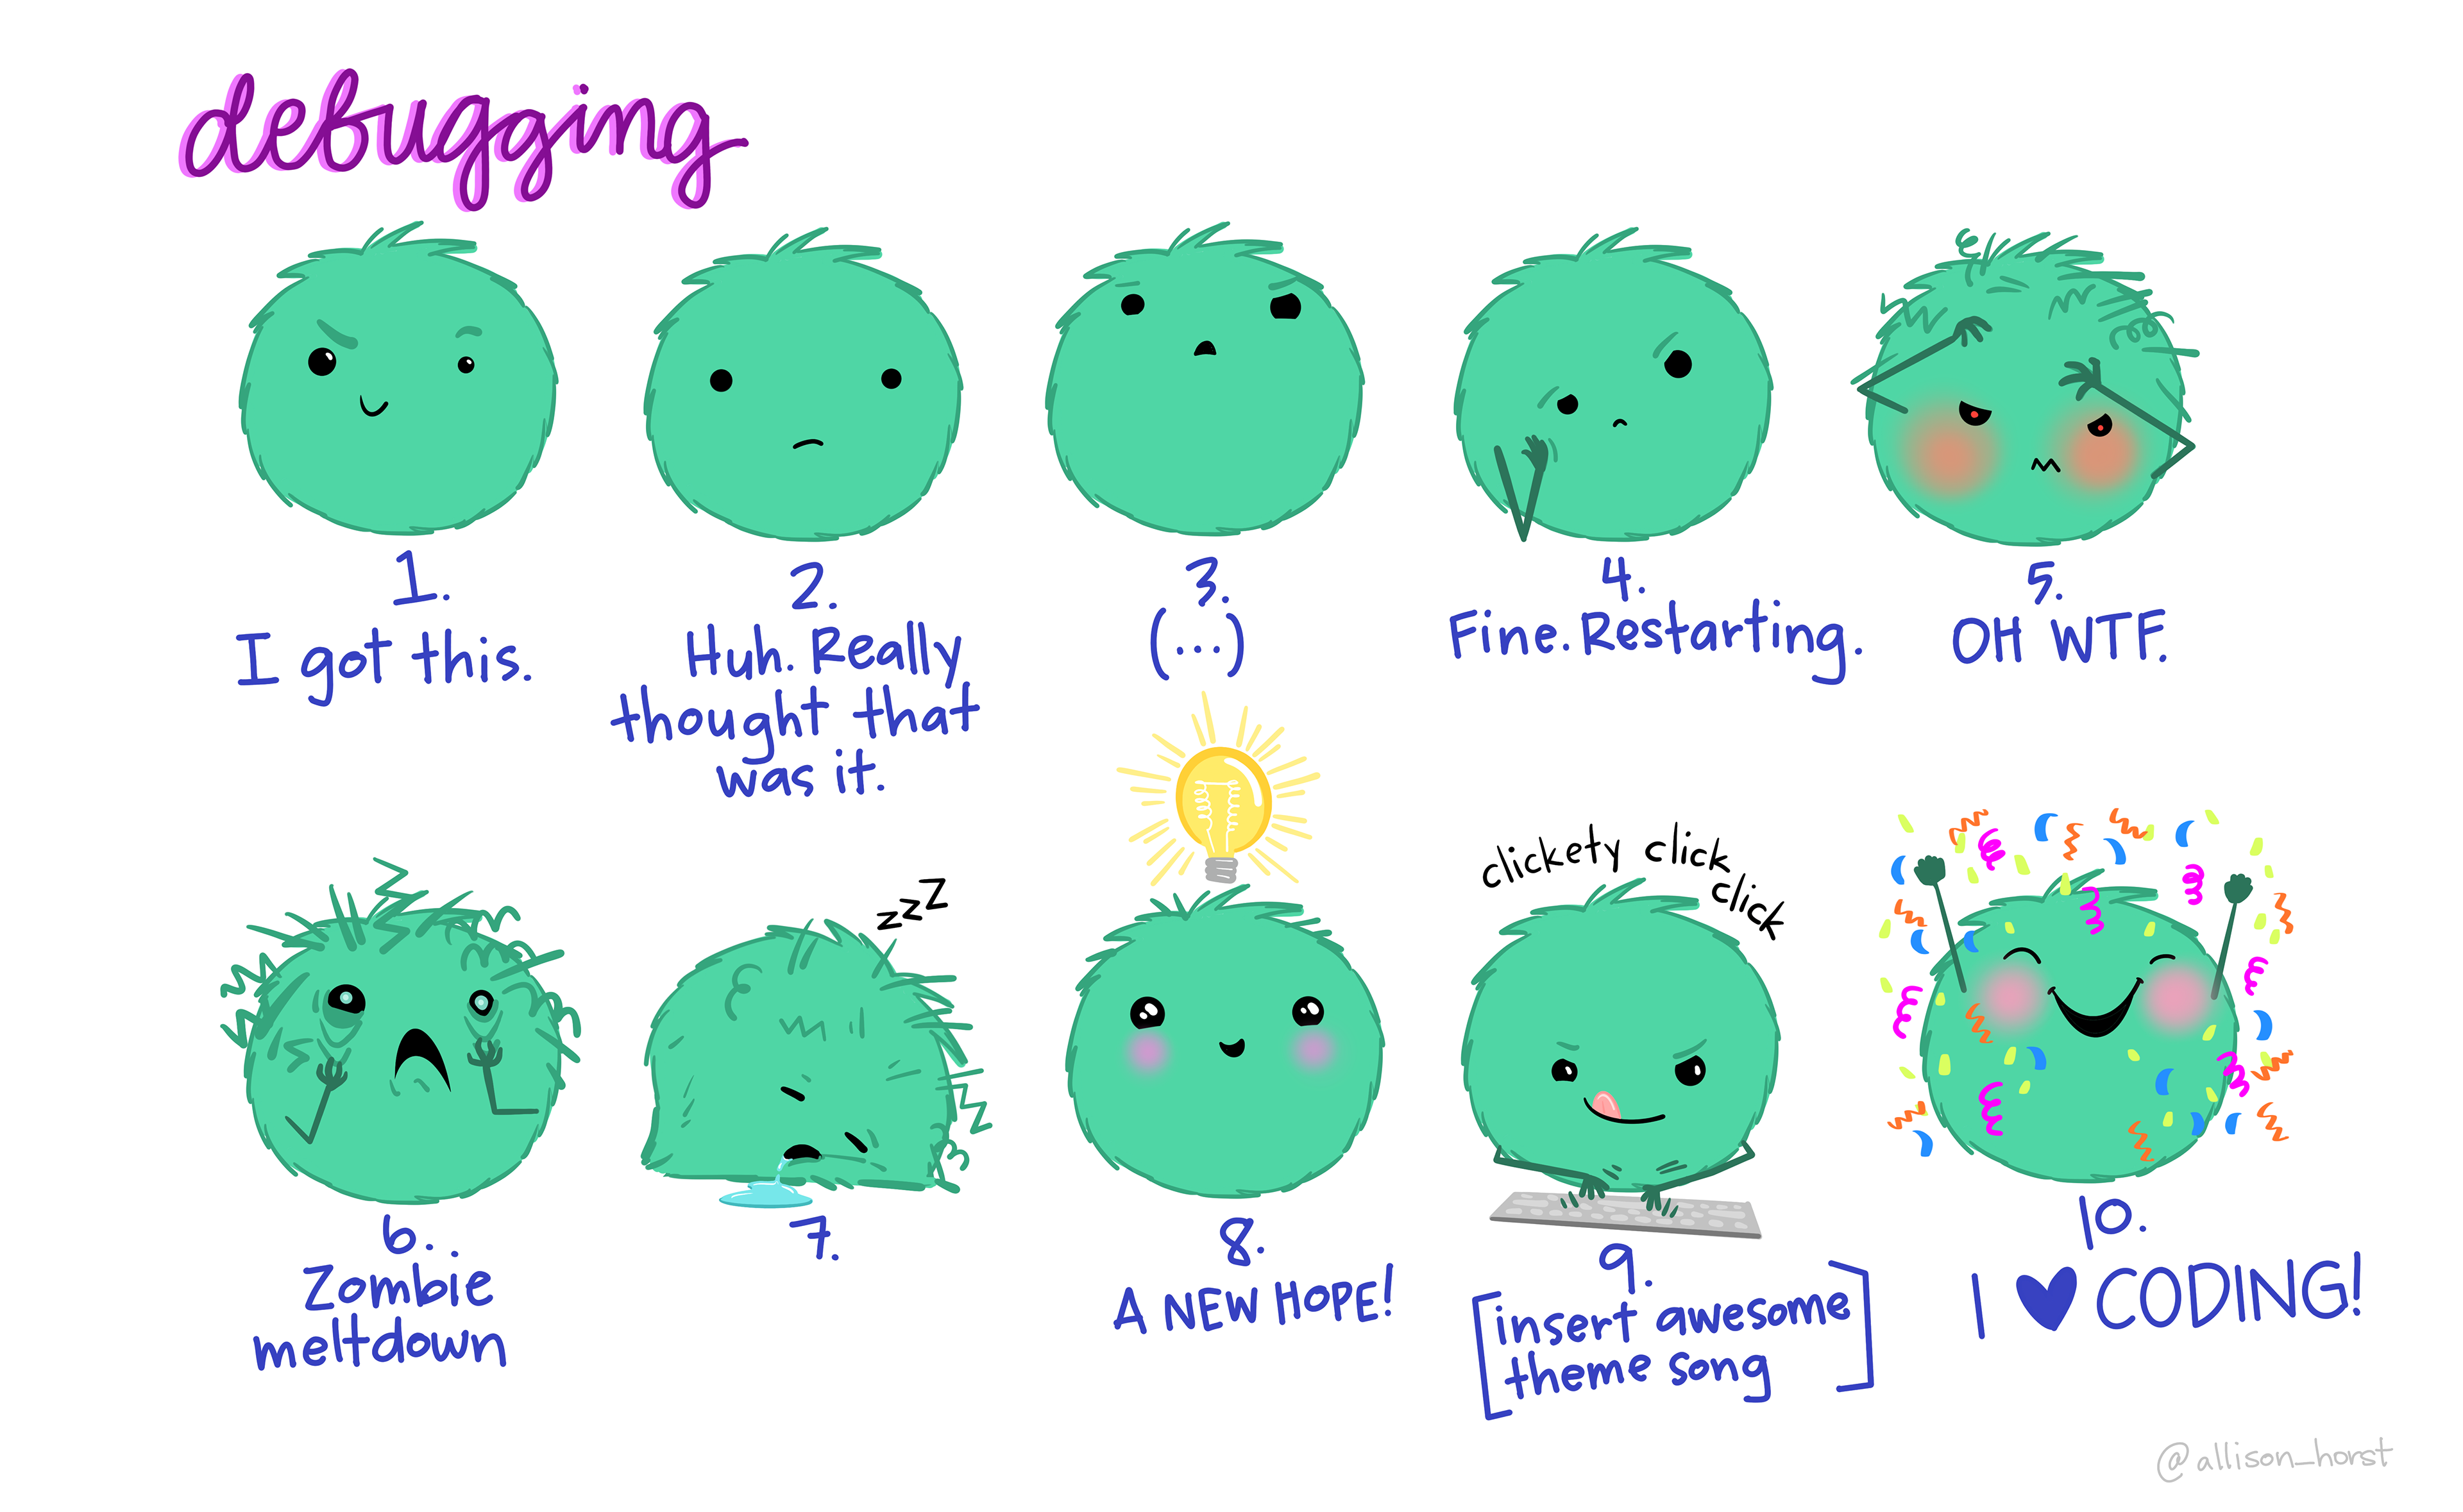 A cartoon of a fuzzy round monster face showing ten different emotions experienced during the process of debugging code. The progression goes from (1) “I got this.”—looking determined and optimistic; (2) “Huh. Really thought that was it.”—looking a bit baffled; (3) “...”—looking up at the ceiling in thought; (4) “Fine. Restarting.”—looking a bit annoyed; (5) “OH WTF.”—looking very frazzled and frustrated; (6) “Zombie meltdown.”—looking like a full meltdown; (7) (blank)—sleeping; (8) “A NEW HOPE!”—a happy-looking monster with a lightbulb above its head; (9) “[insert awesome theme song]”—looking determined and typing away; (10) “I love coding!”—arms raised in victory with a big smile, with confetti falling.”
